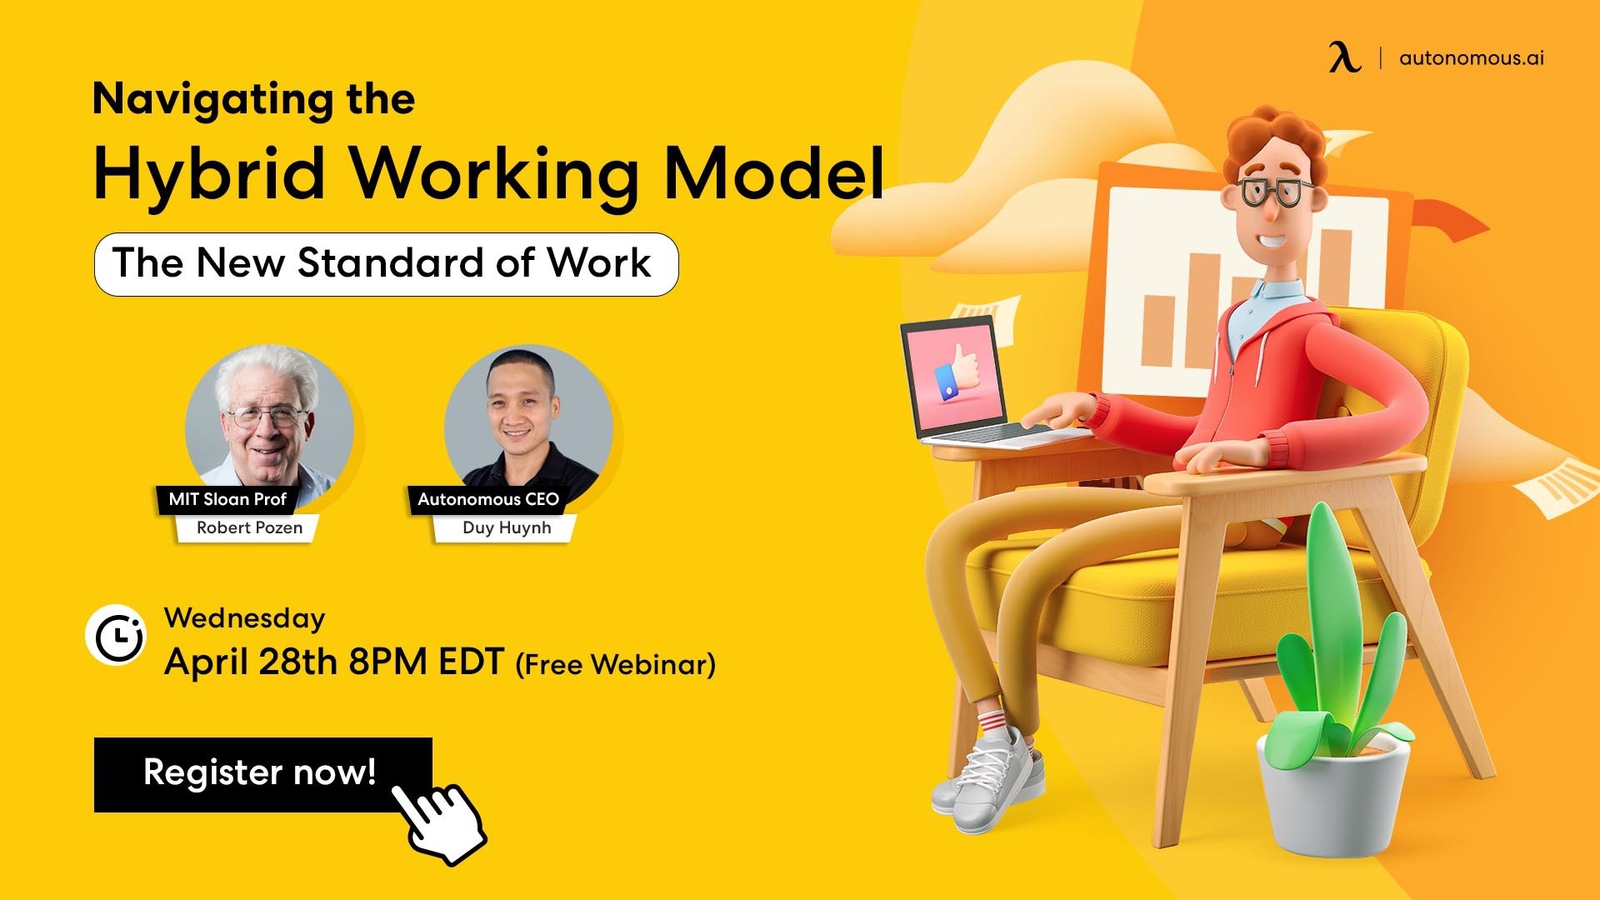 Navigating the Hybrid Working Model - The New Standard of Work